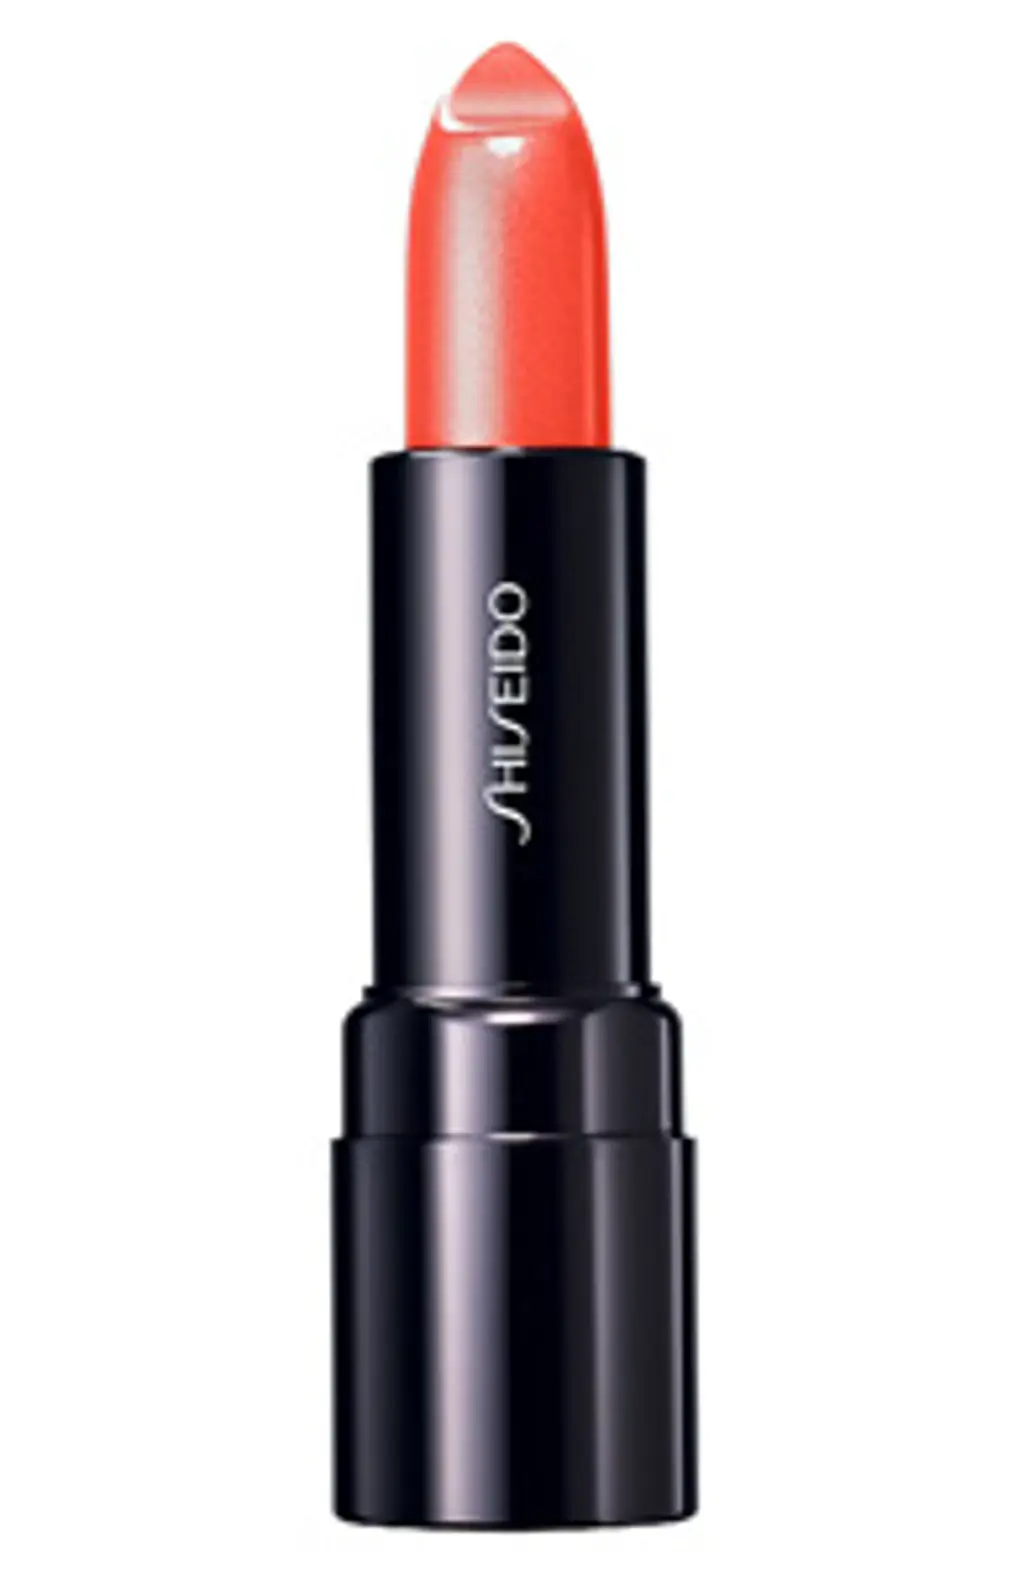 Shiseido Lipstick in ‘Day Lily’